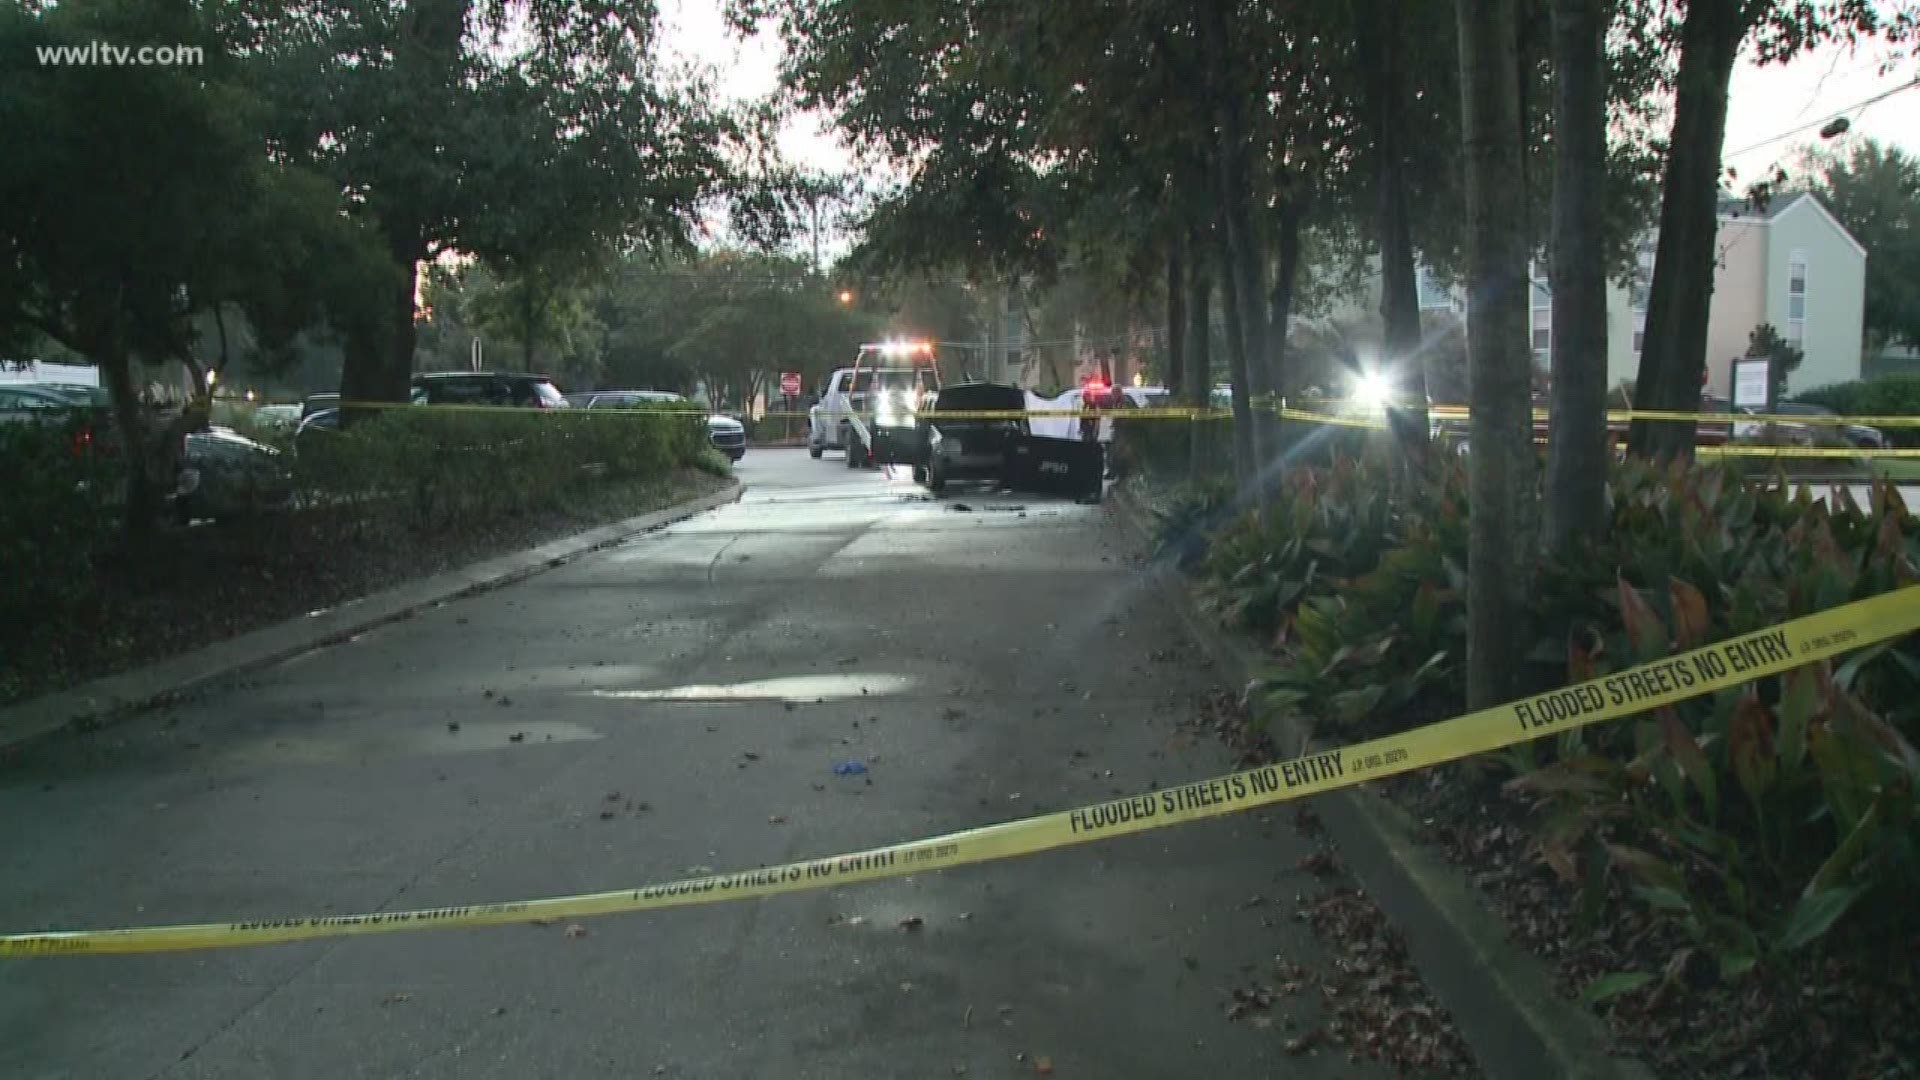 The Jefferson Parish Coroner's Office said that the body was found badly burned inside a Jeep at a River Ridge apartment complex.